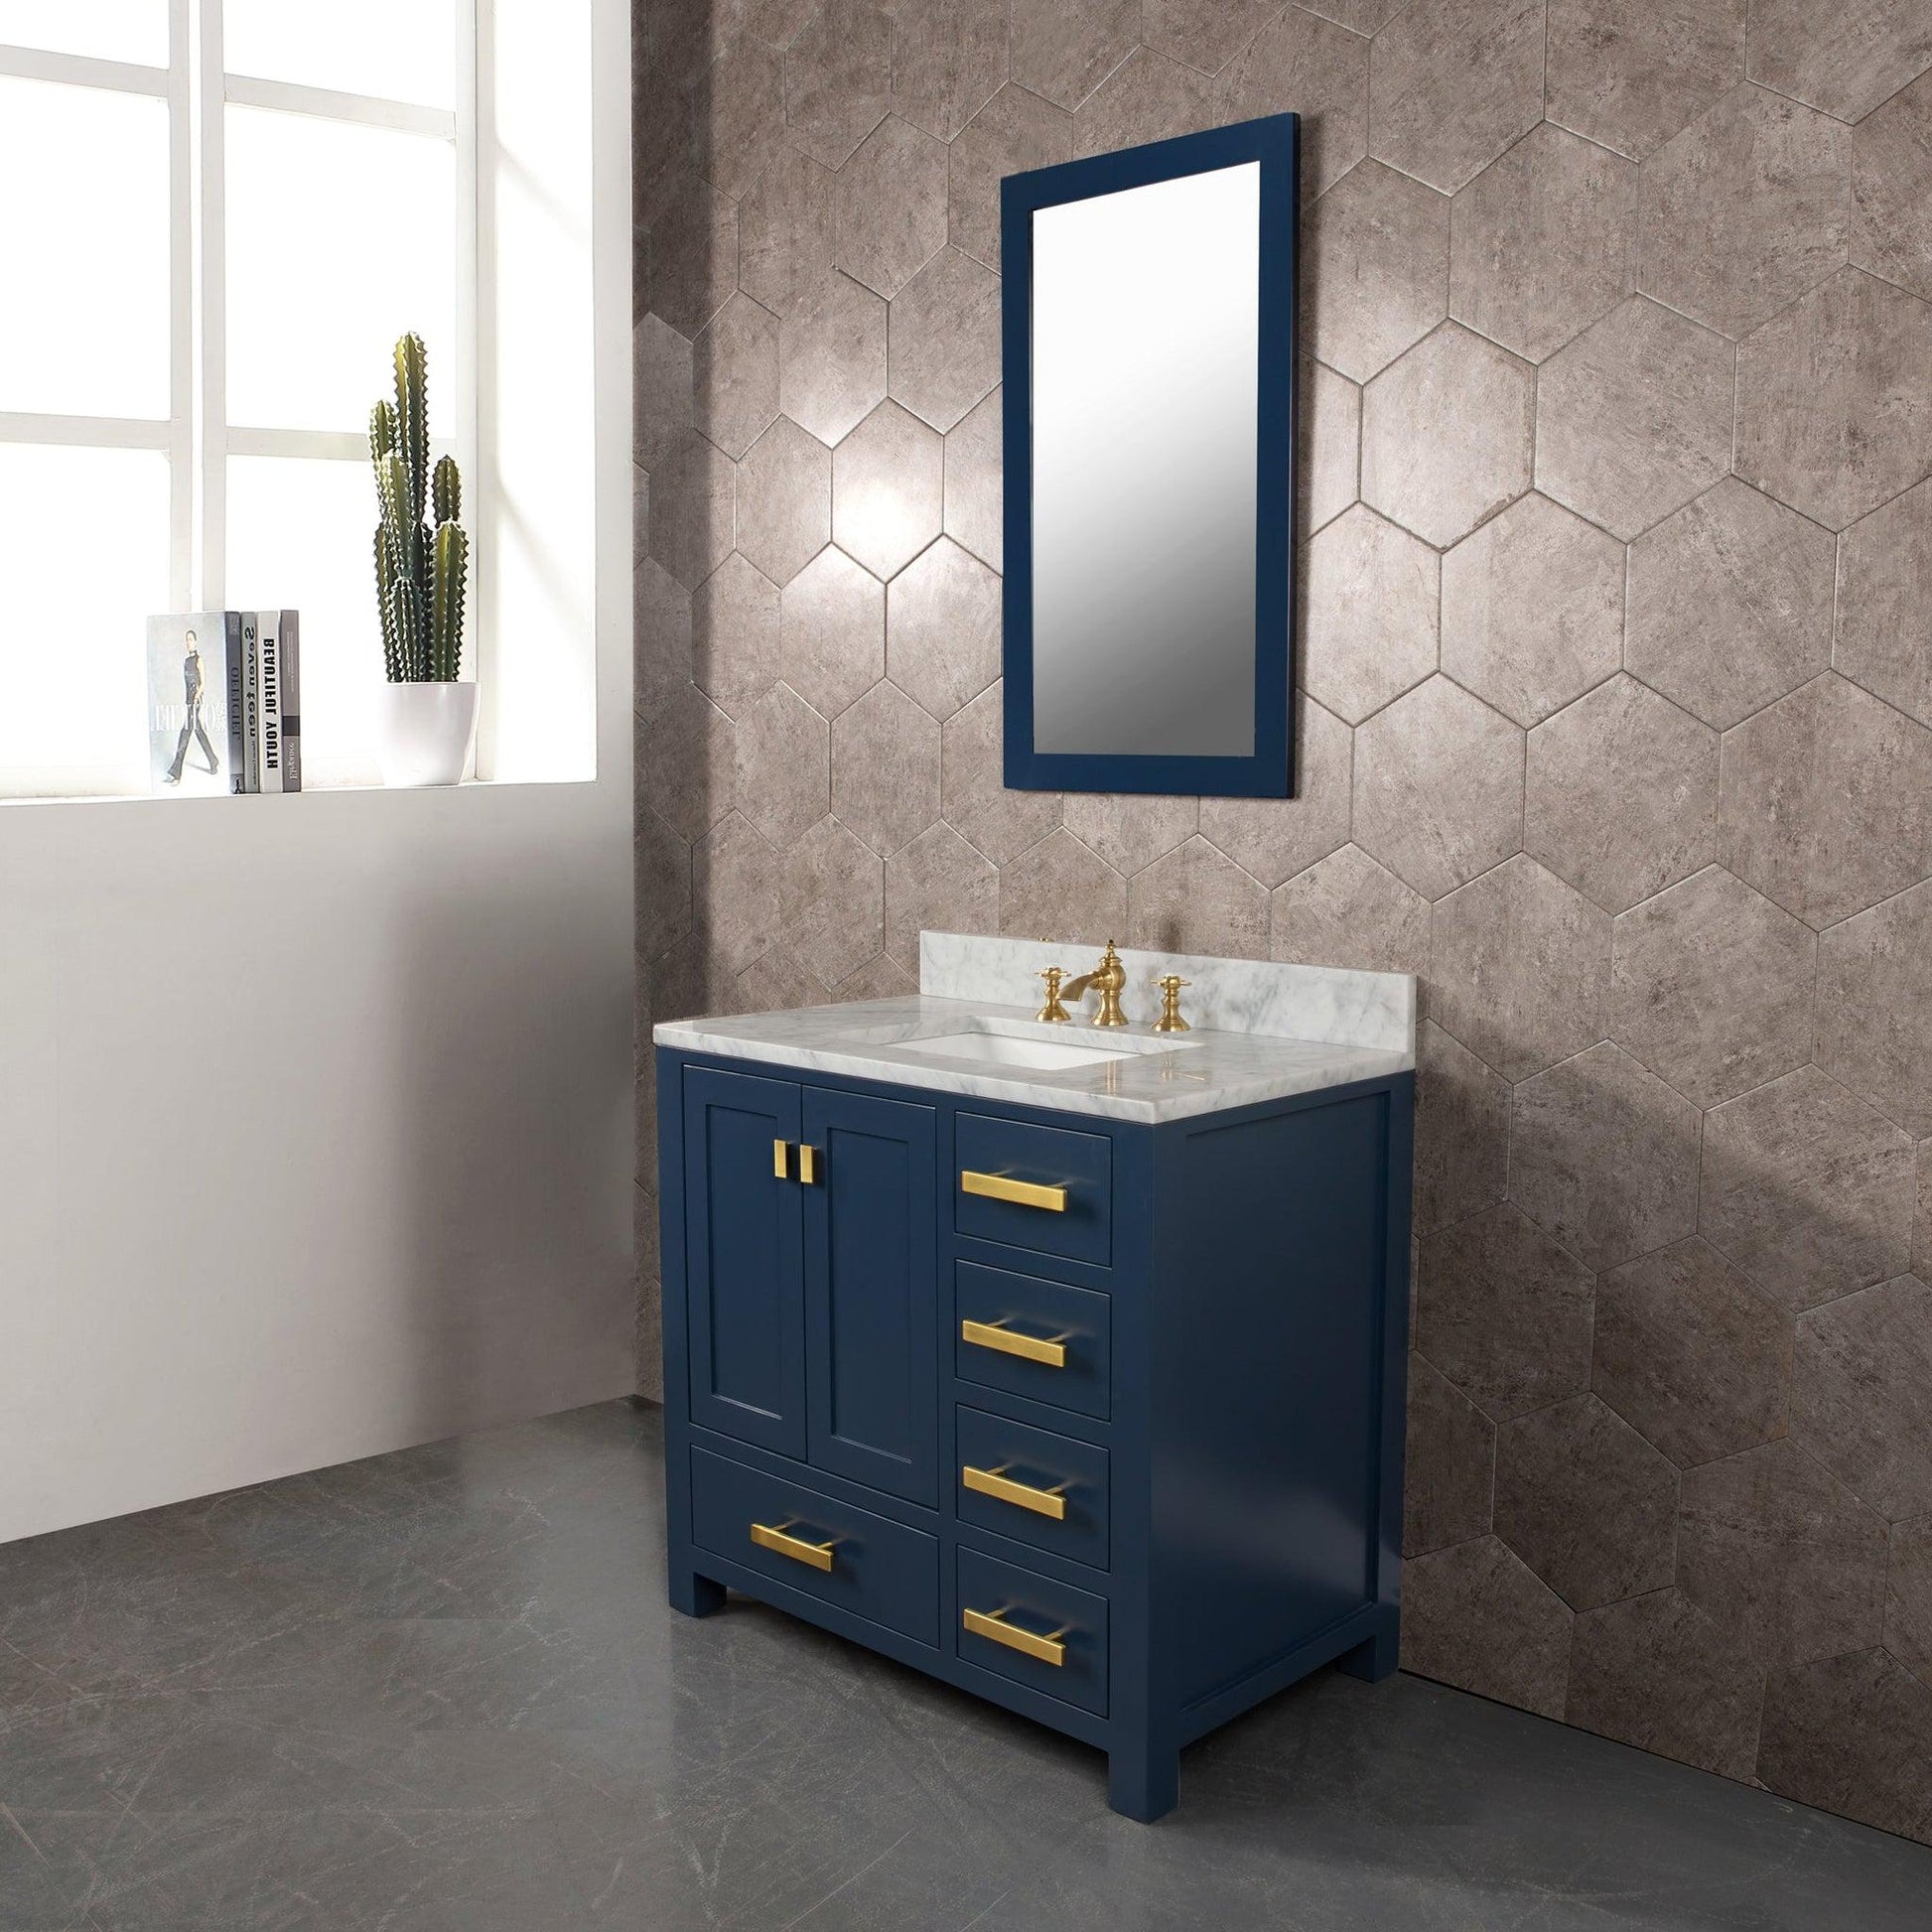 Water Creation Madison 36" Single Sink Carrara White Marble Vanity In Monarch Blue With Matching Mirror and F2-0013-06-FX Lavatory Faucet